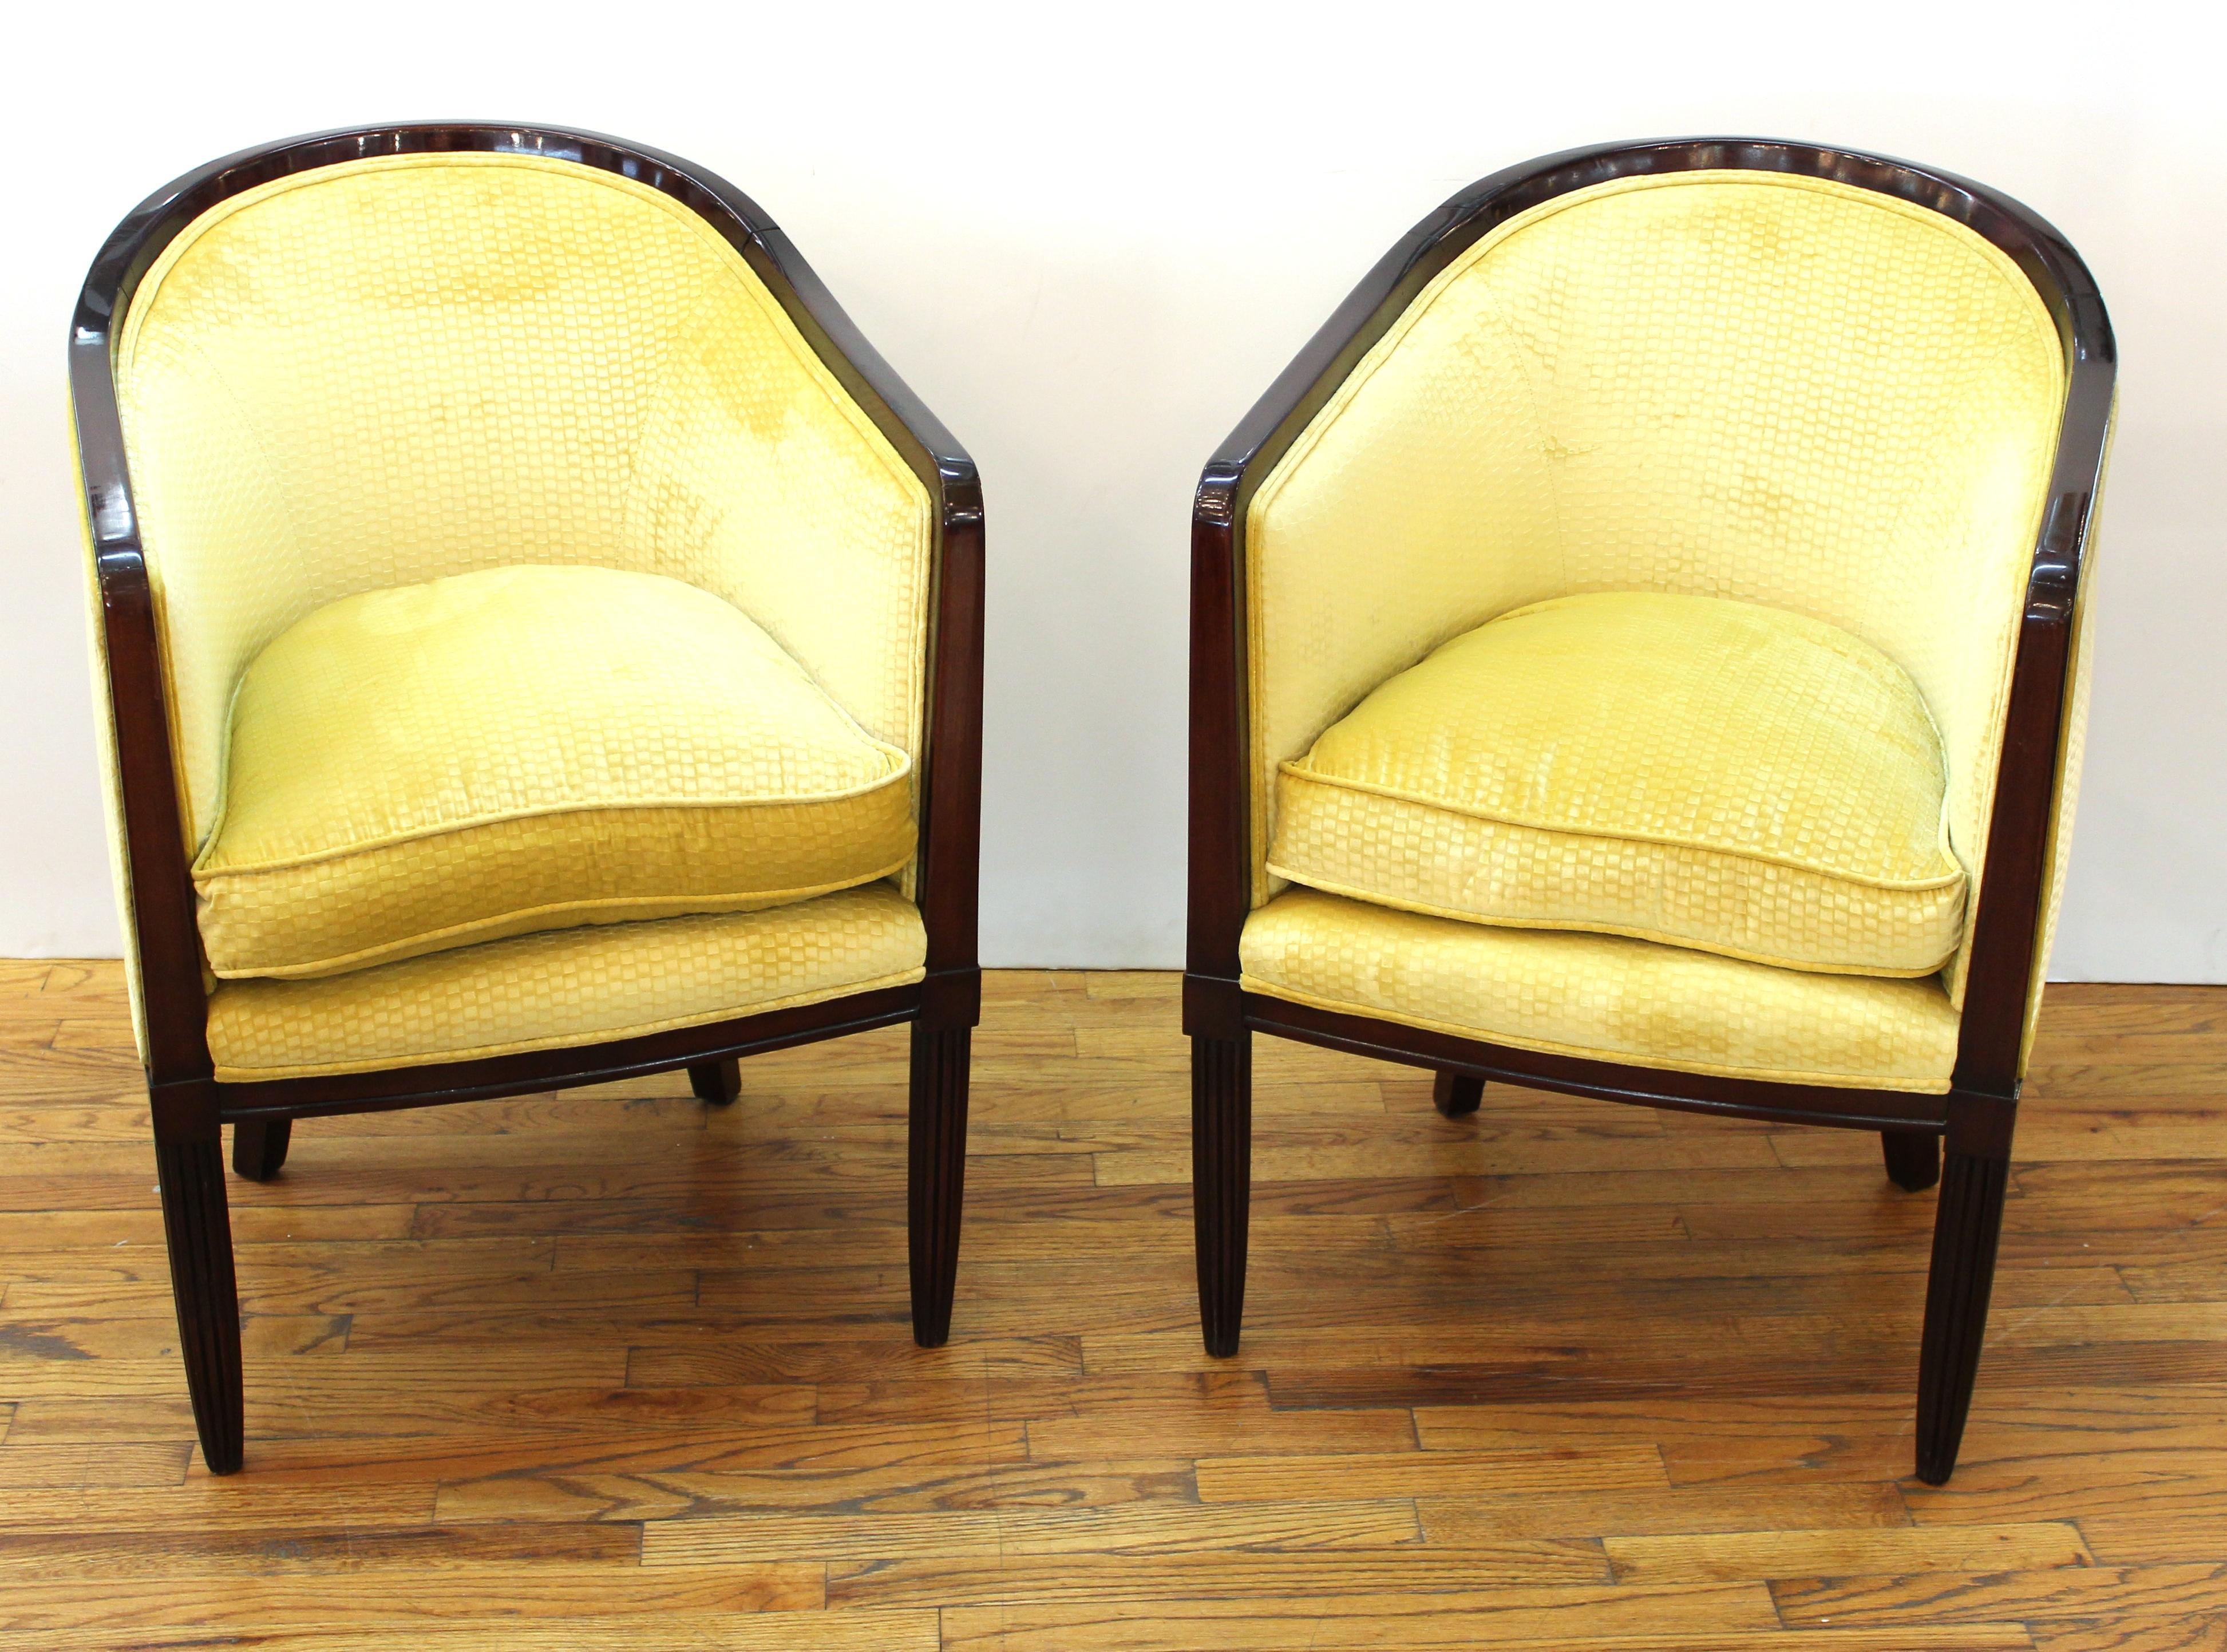 French Art Deco pair of tub chairs in ebonized wood with fluted front legs and mustard yellow velvet upholstery with gauffrage effect.